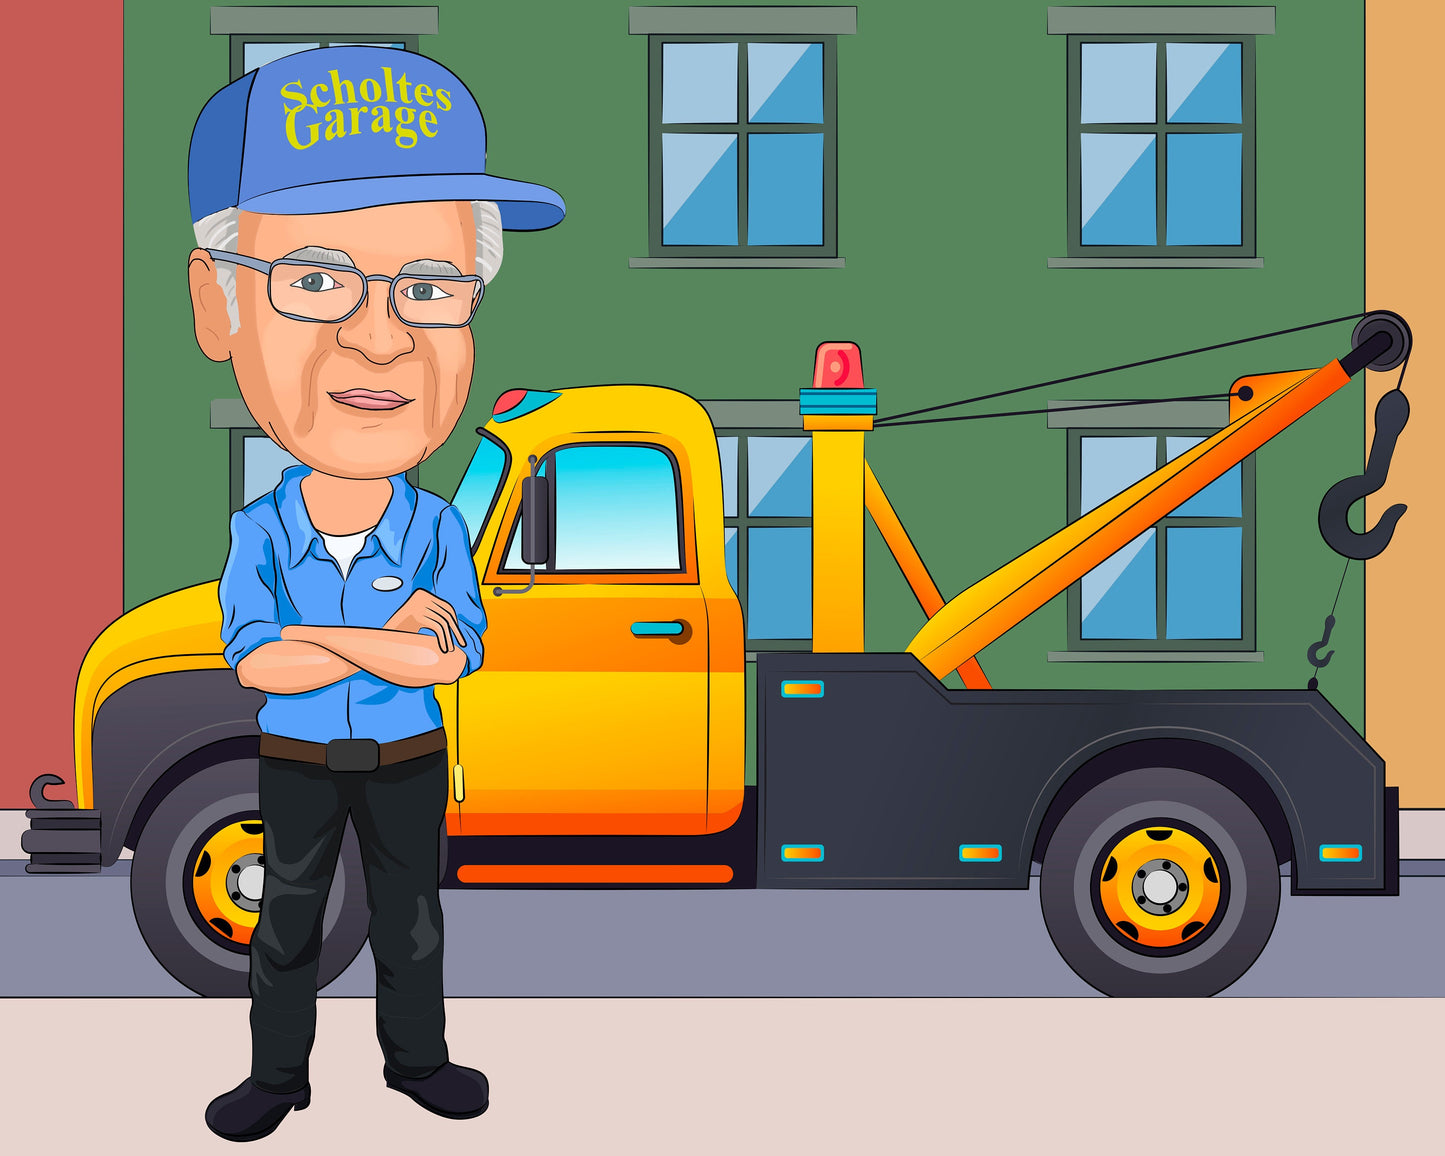 Tow Truck Driver Gift - Custom Caricature Portrait From Your Photo